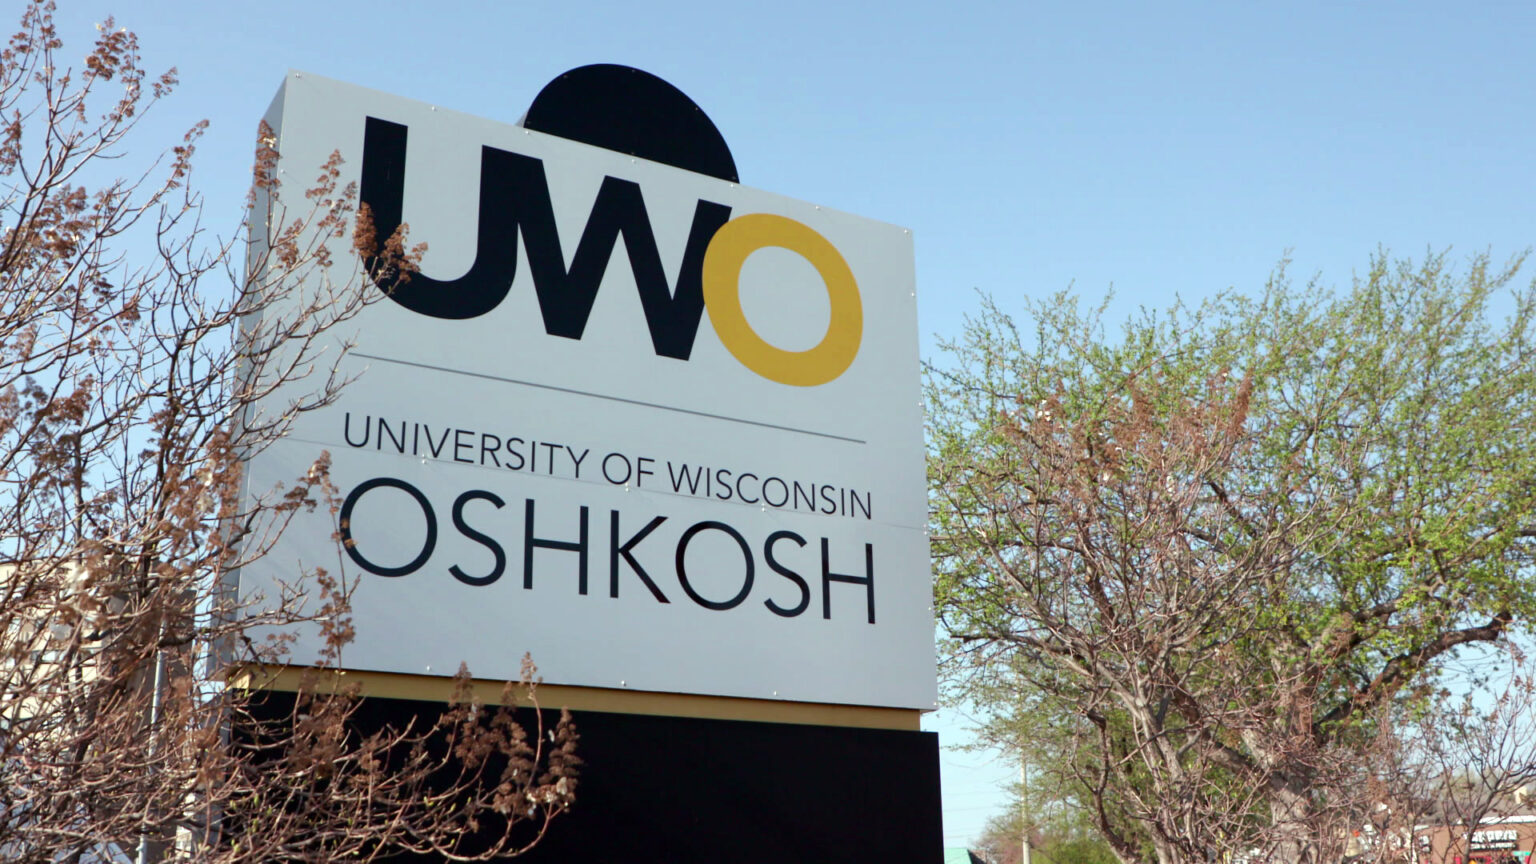 A sign with a stylized wordmark incorporating the letters UWO and the words University of Wisconsin and Oshkosh stands amid trees showing new spring growth in their foliage.